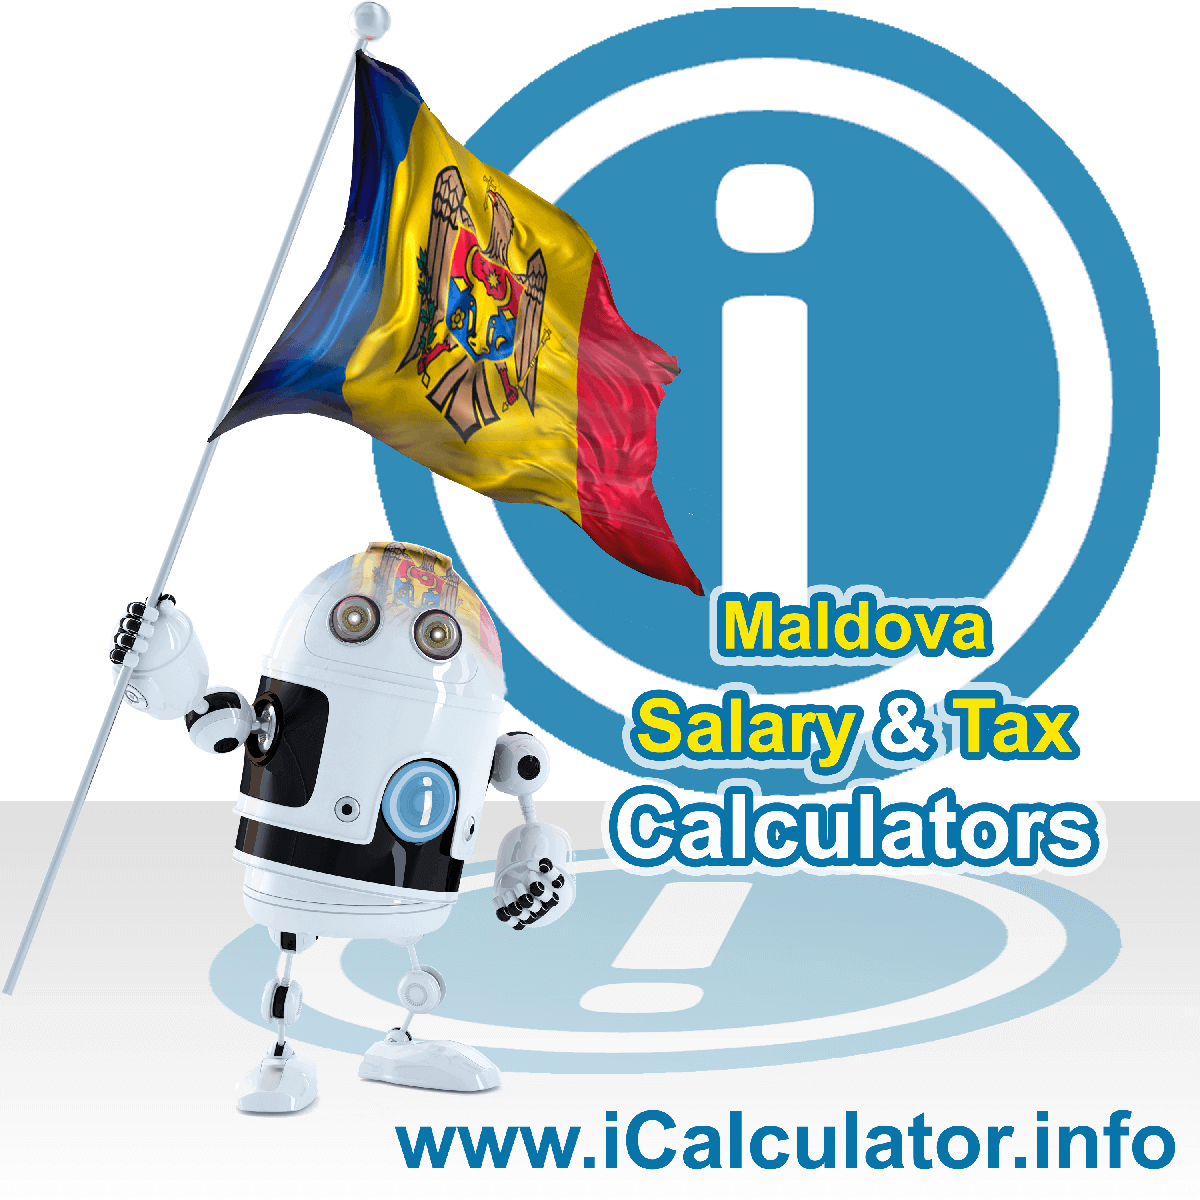 Moldova Salary Calculator. This image shows the Moldovaese flag and information relating to the tax formula for the Moldova Tax Calculator